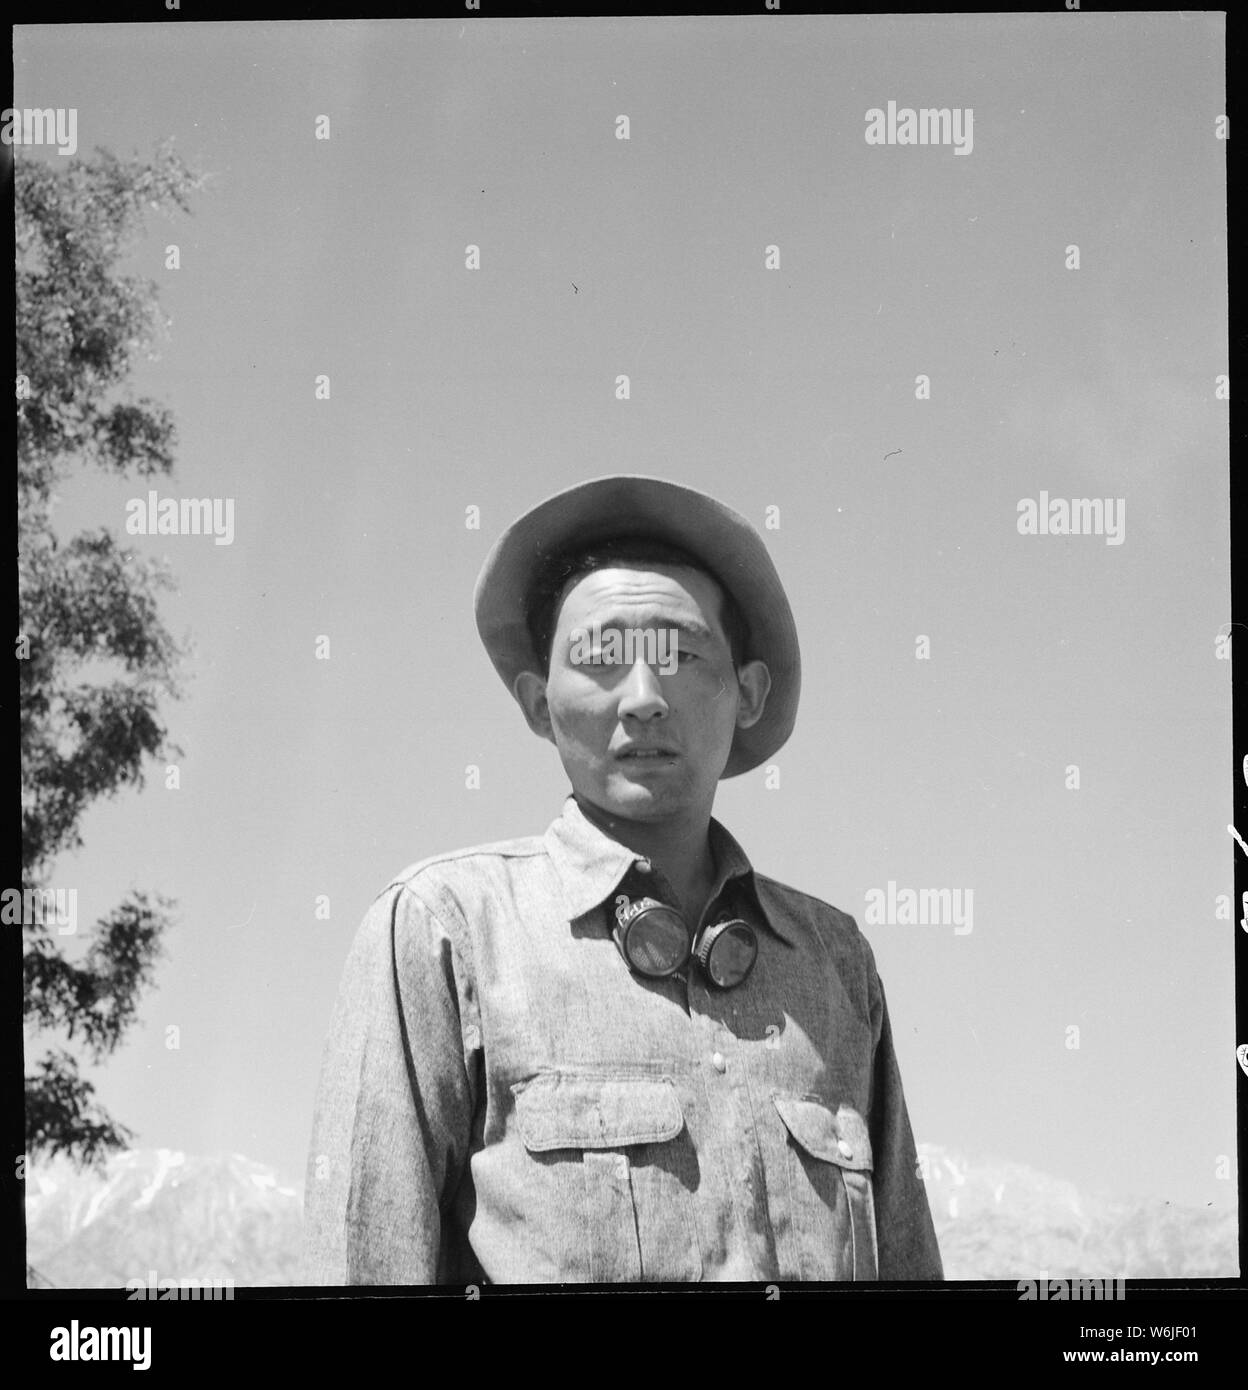 Manzanar Relocation Center, Manzanar, California. Johnny Fukazawa, foreman of fields Numbers 3, 4, . . .; Scope and content:  The full caption for this photograph reads: Manzanar Relocation Center, Manzanar, California. Johnny Fukazawa, foreman of fields Numbers 3, 4, 5, and 6, heading a 20-man field crew on the farm project, says there are many problems they have to solve in their agricultural work at this War Relocation Authority center for evacuees of Japanese ancestry. Stock Photo